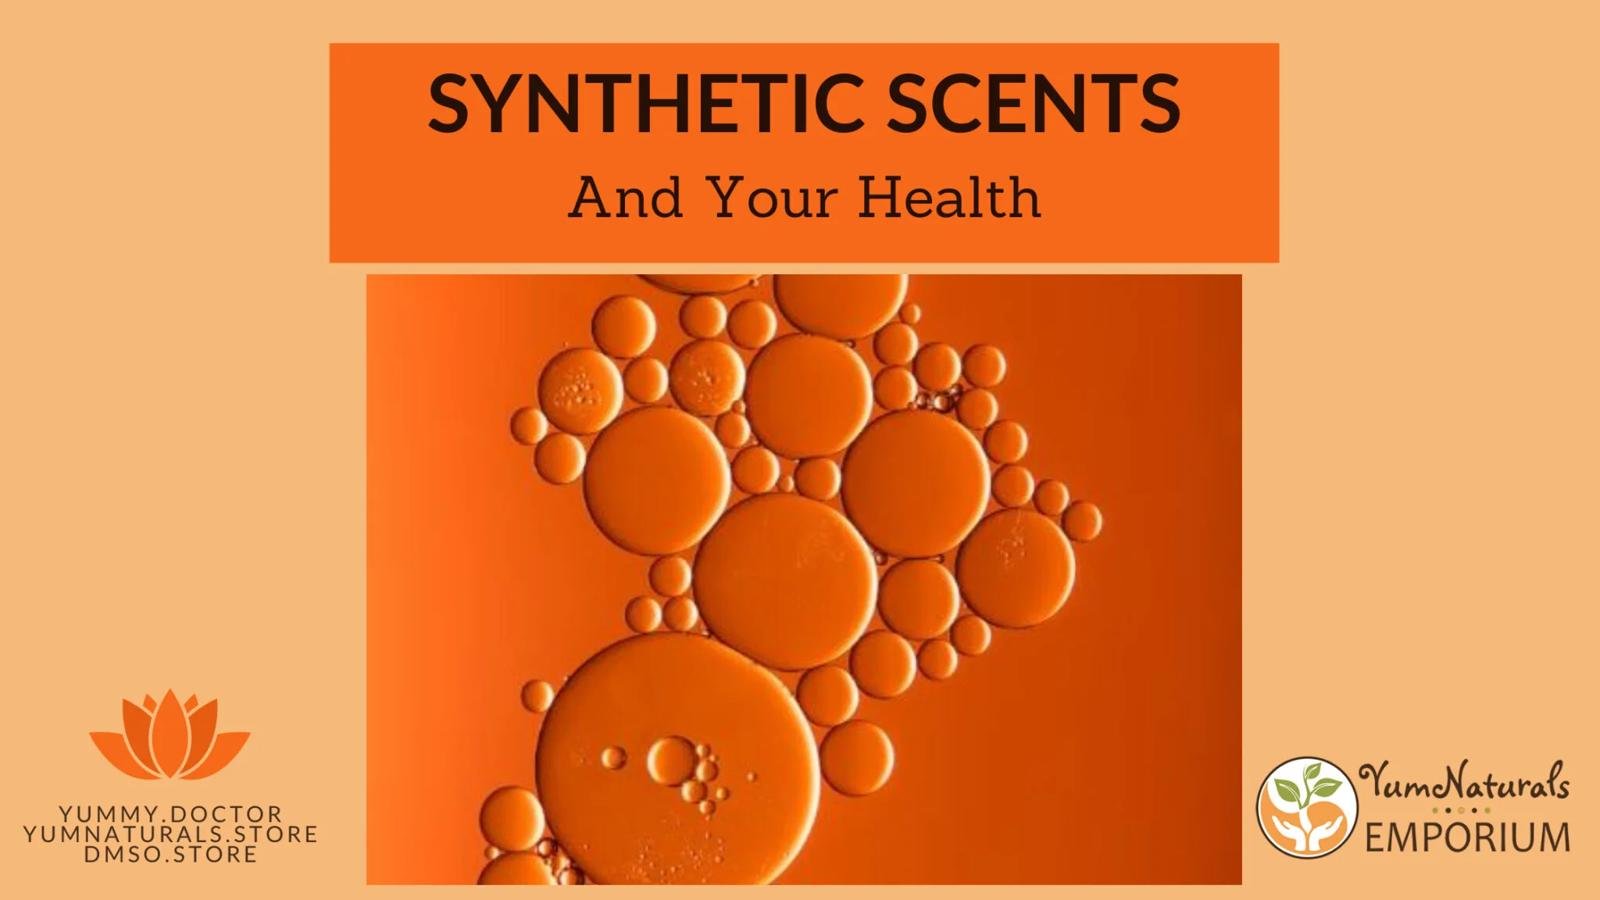 Yummy Doctor Holistic Health Education - Blog - Synthetic Scents and Your Health